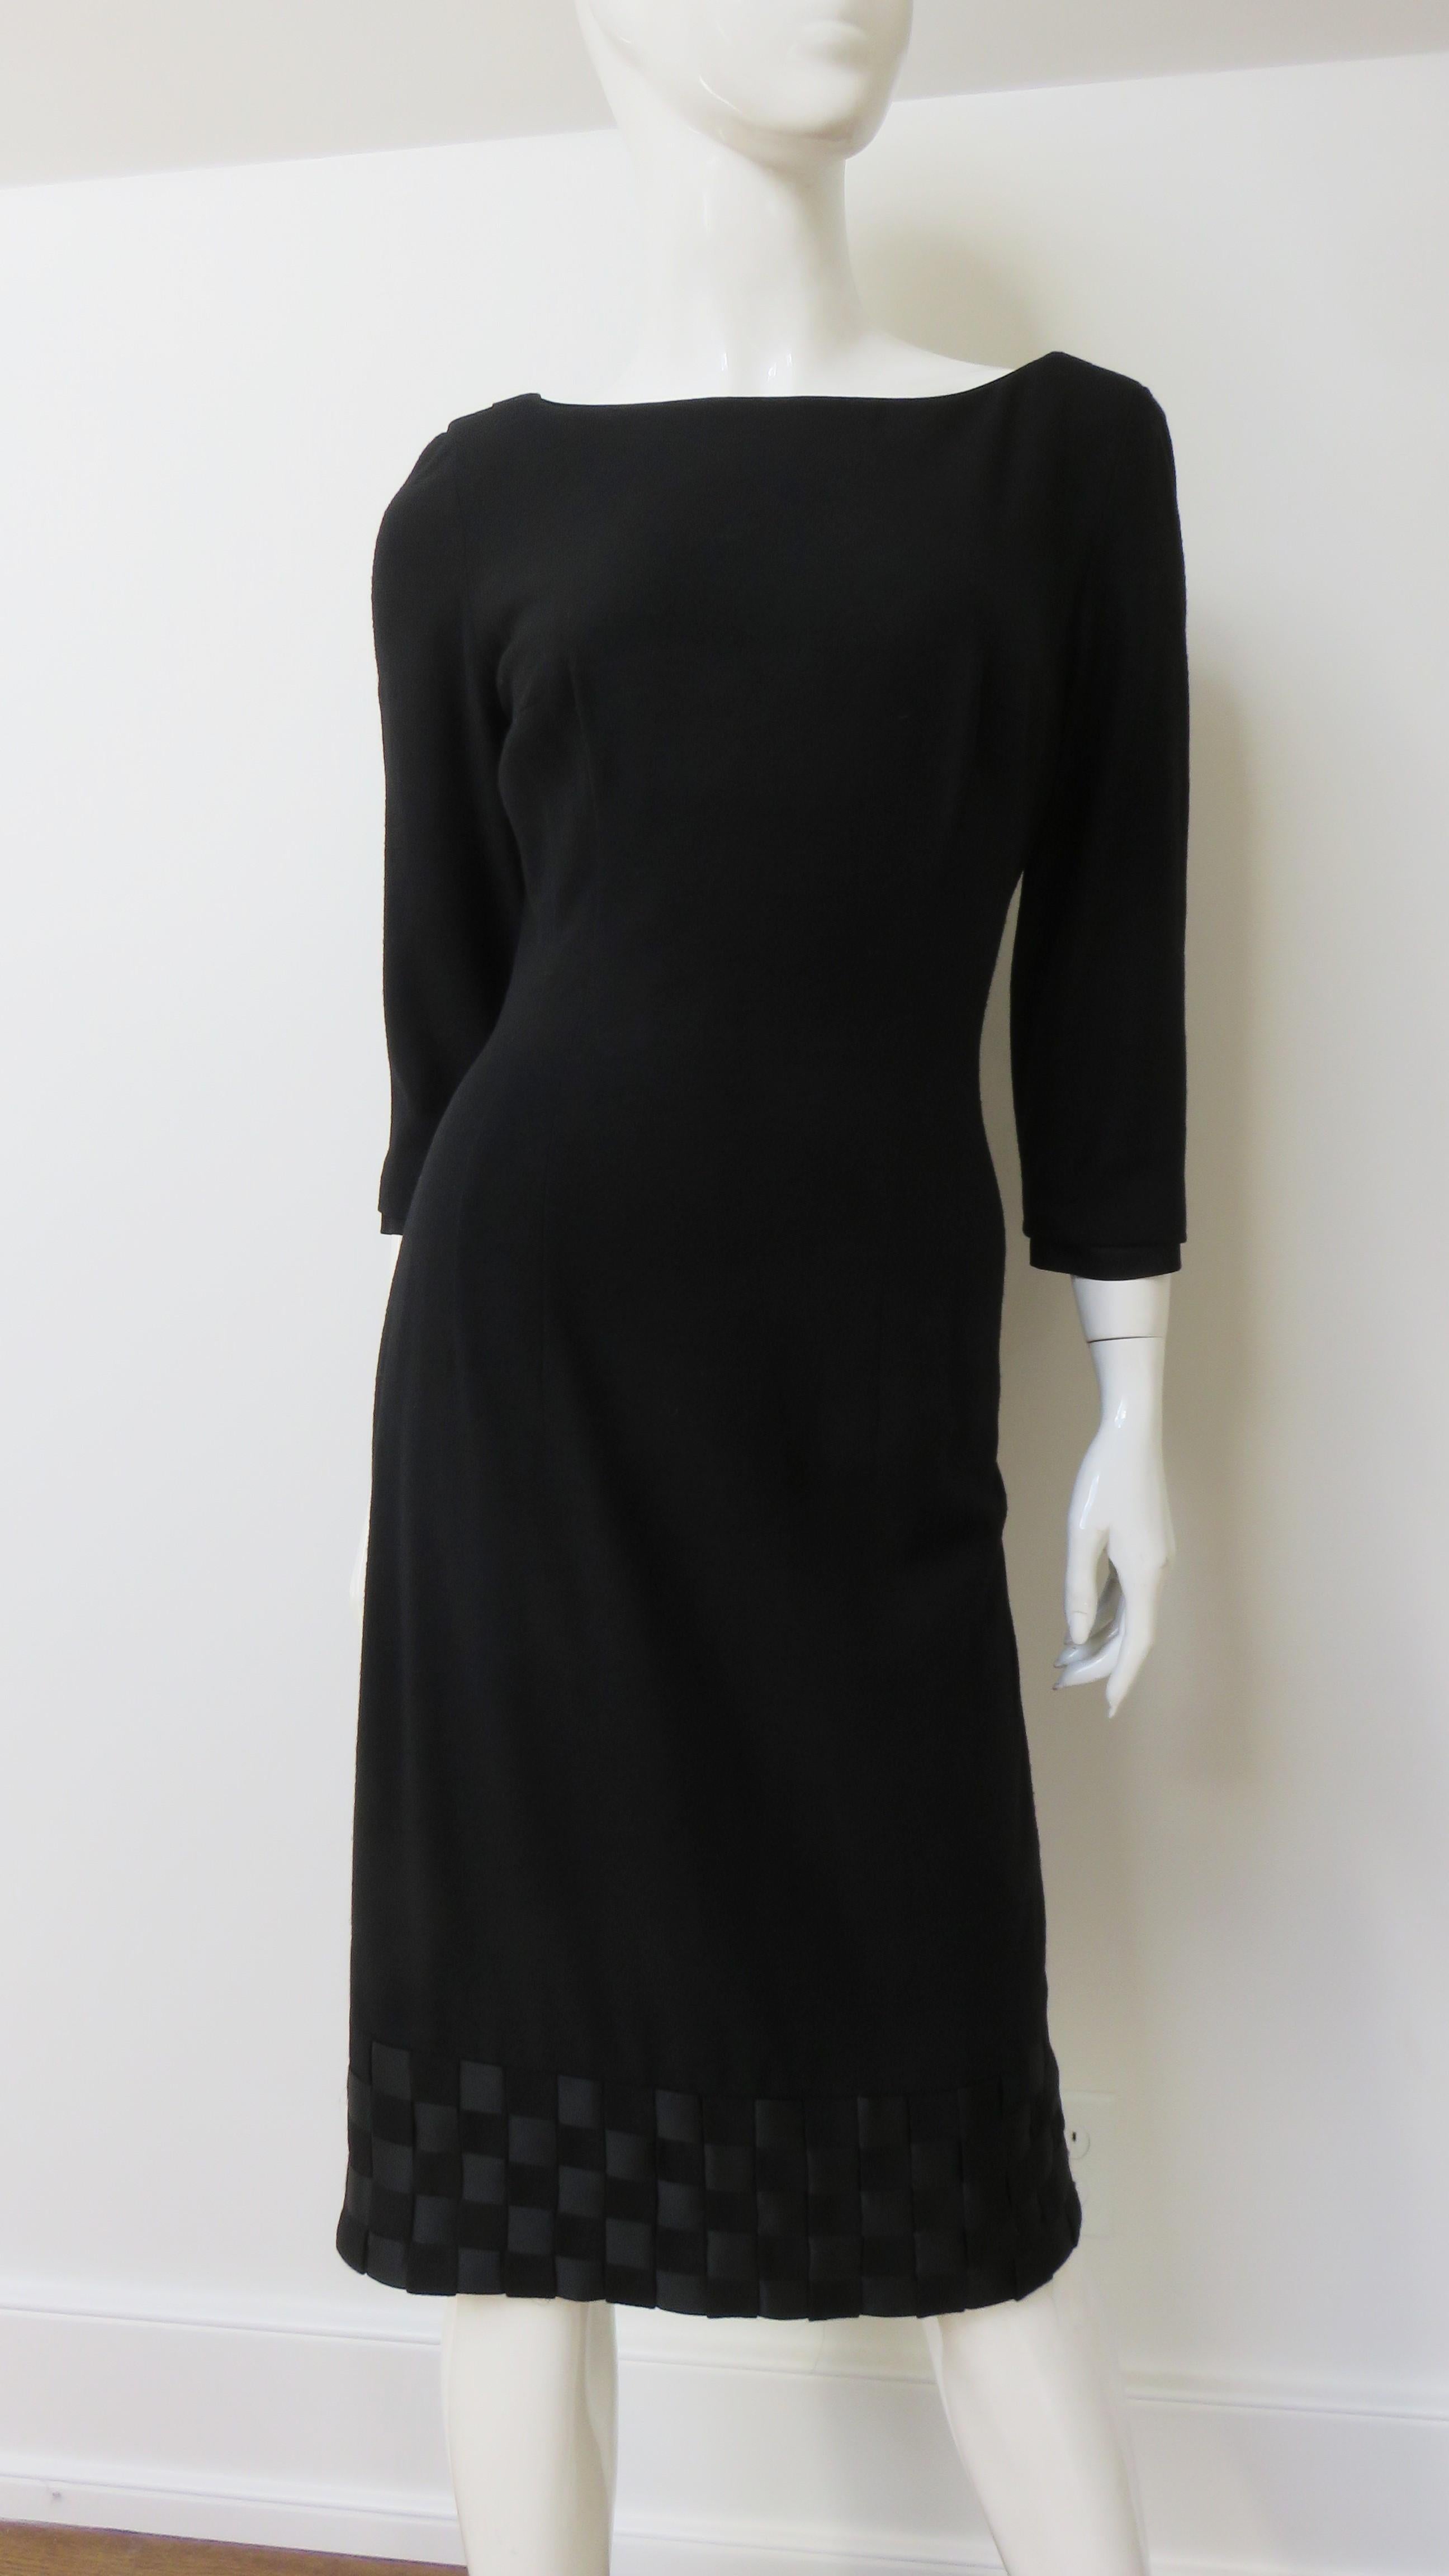 Mr Blackwell Woven Hem and Collar 1950s Dress In Good Condition For Sale In Water Mill, NY